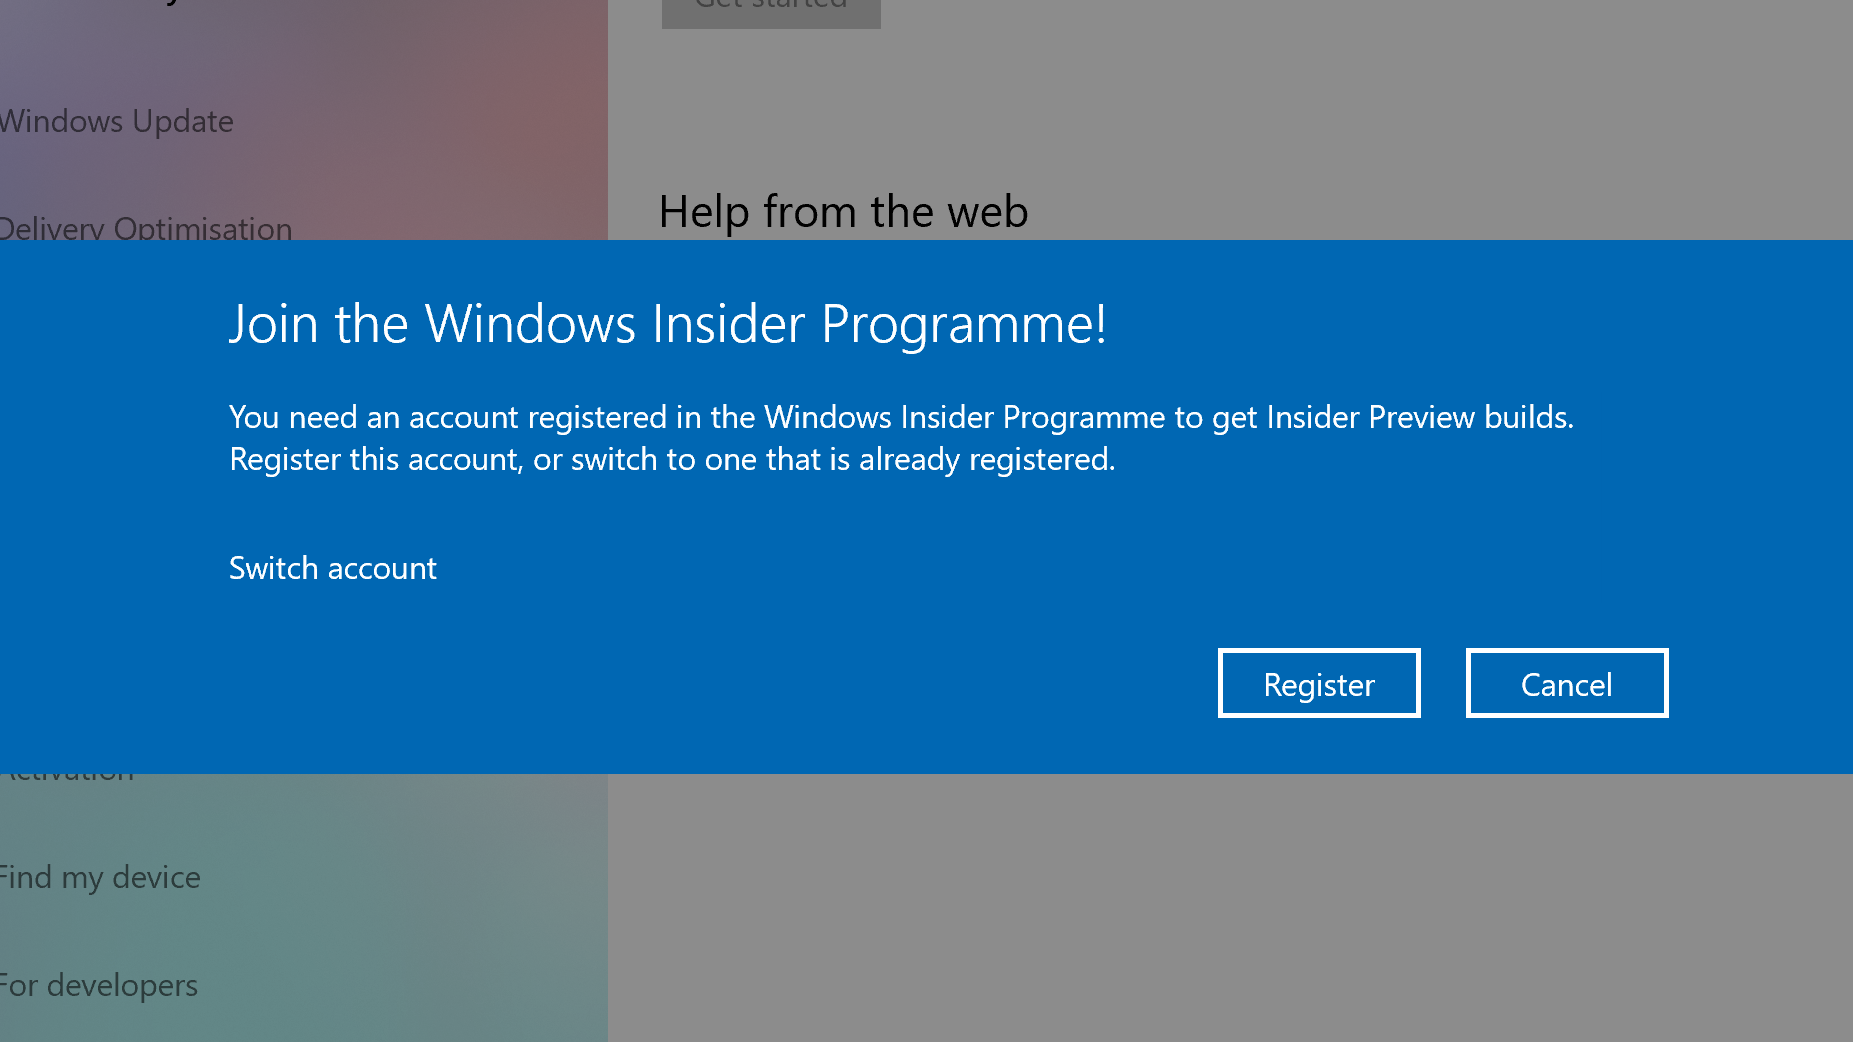 Screenshot of process of downloading and installing Windows 11